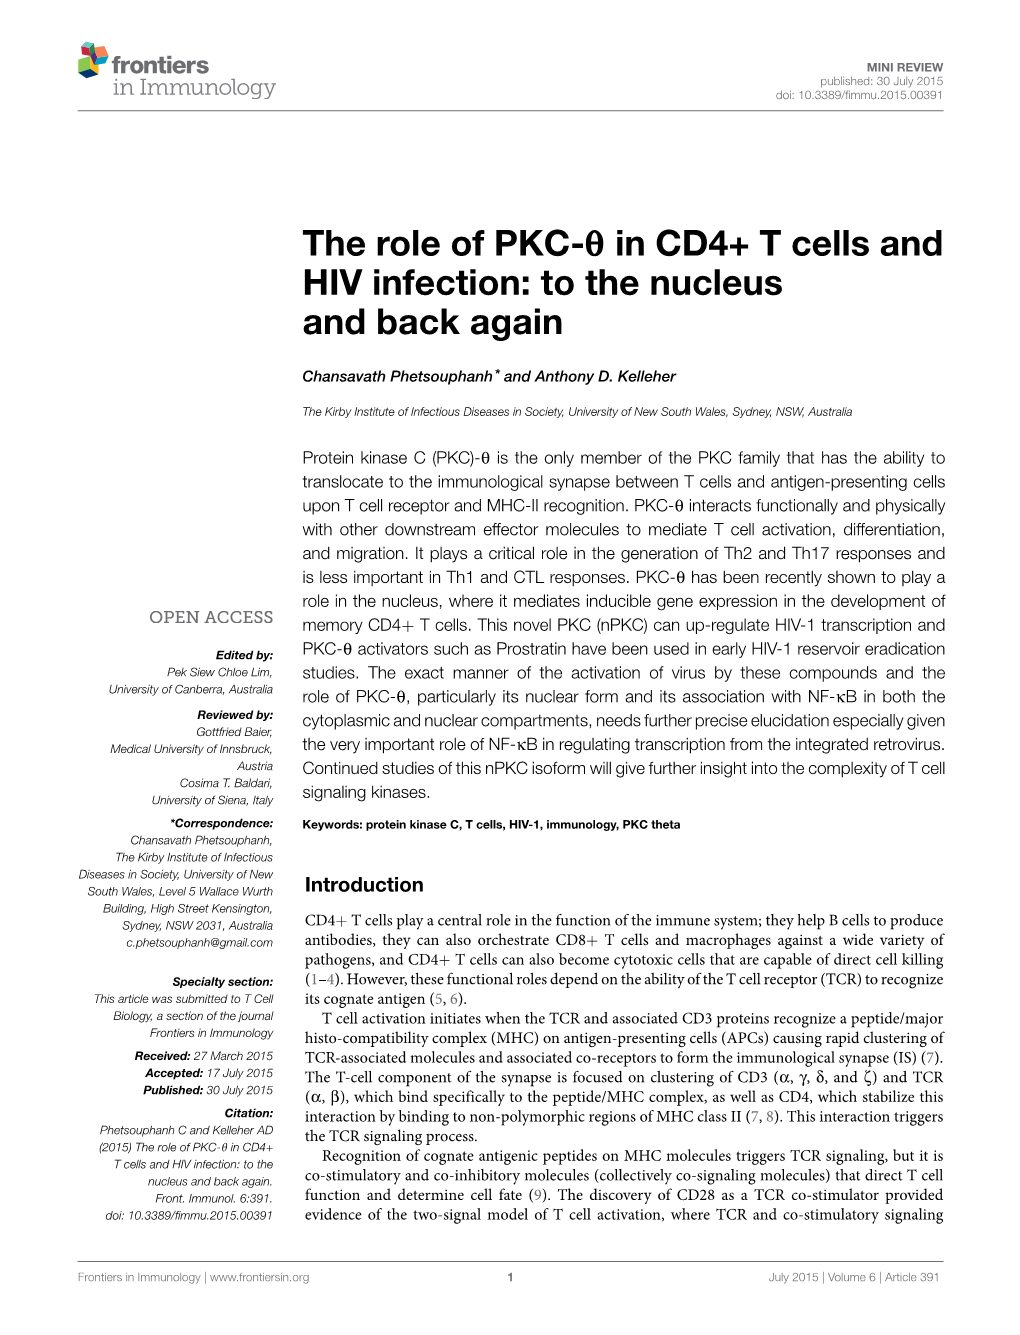 The Role of PKC-Θ in CD4+ T Cells and HIV Infection: to the Nucleus and Back Again